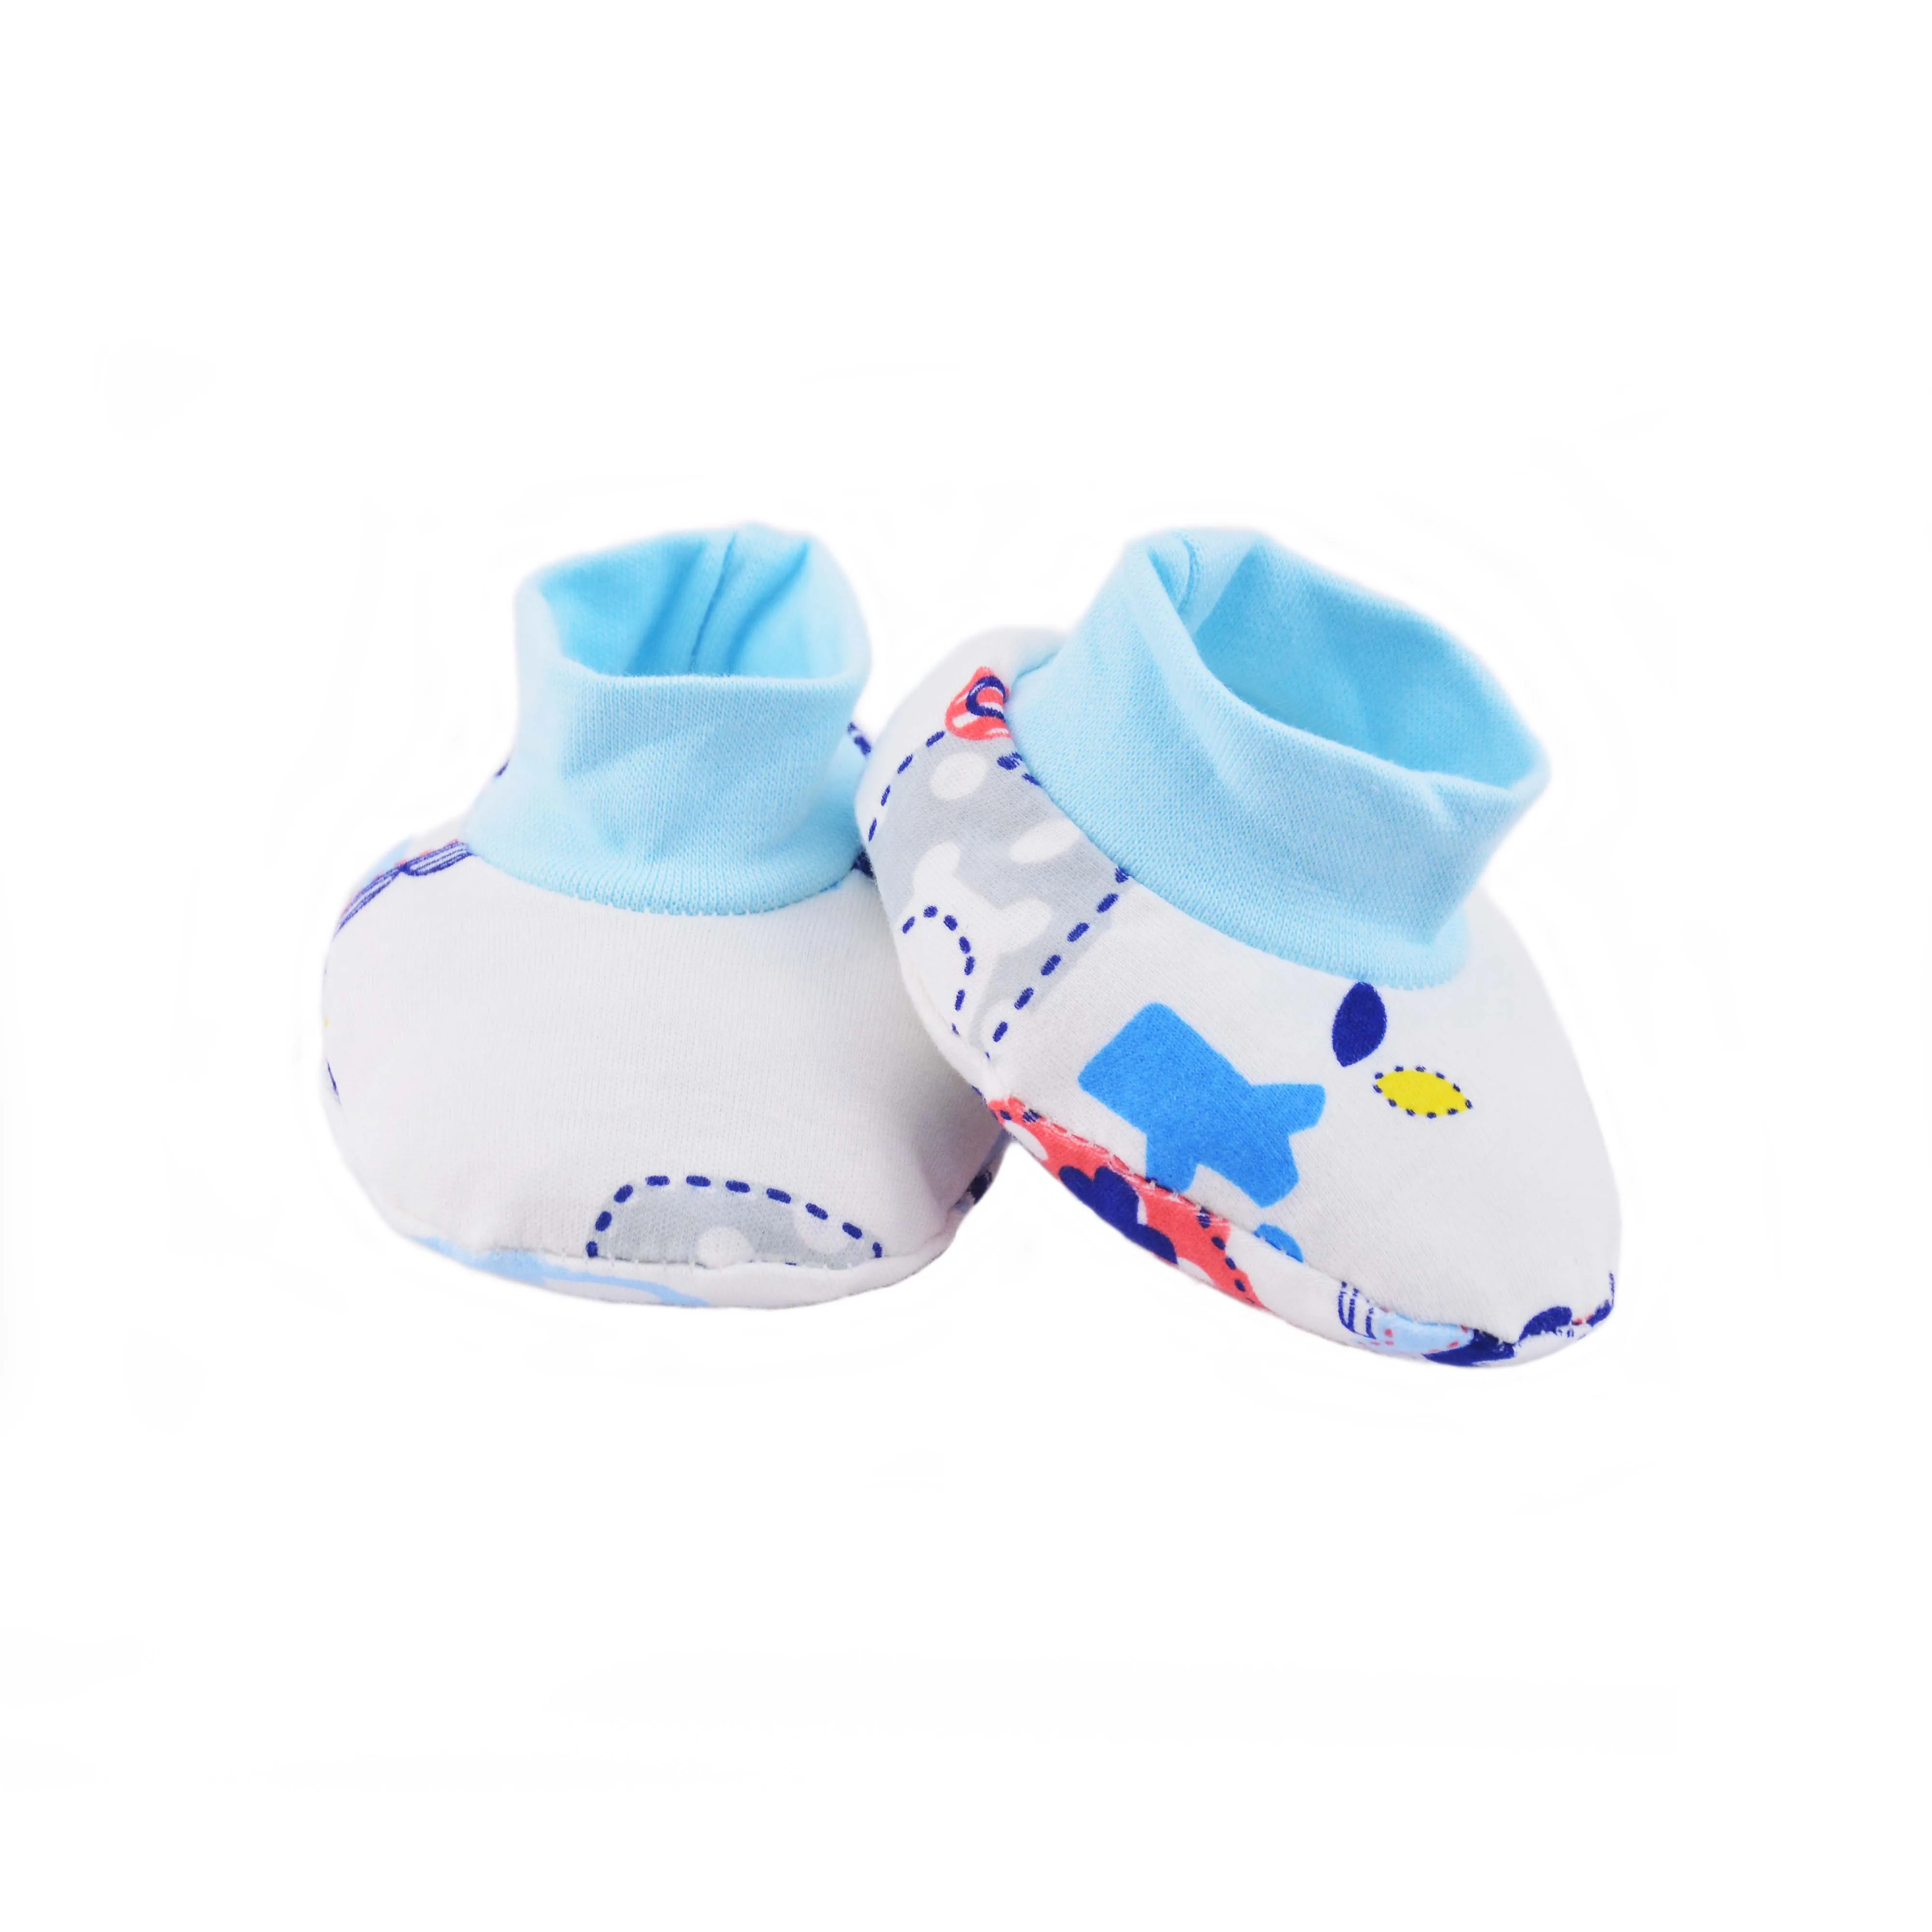 Newborn Baby Cotton Soft Shoes Slippers Baby Socks Baby Booties - Buy Soft Baby  Shoes,Booties,Booties Baby Product on 